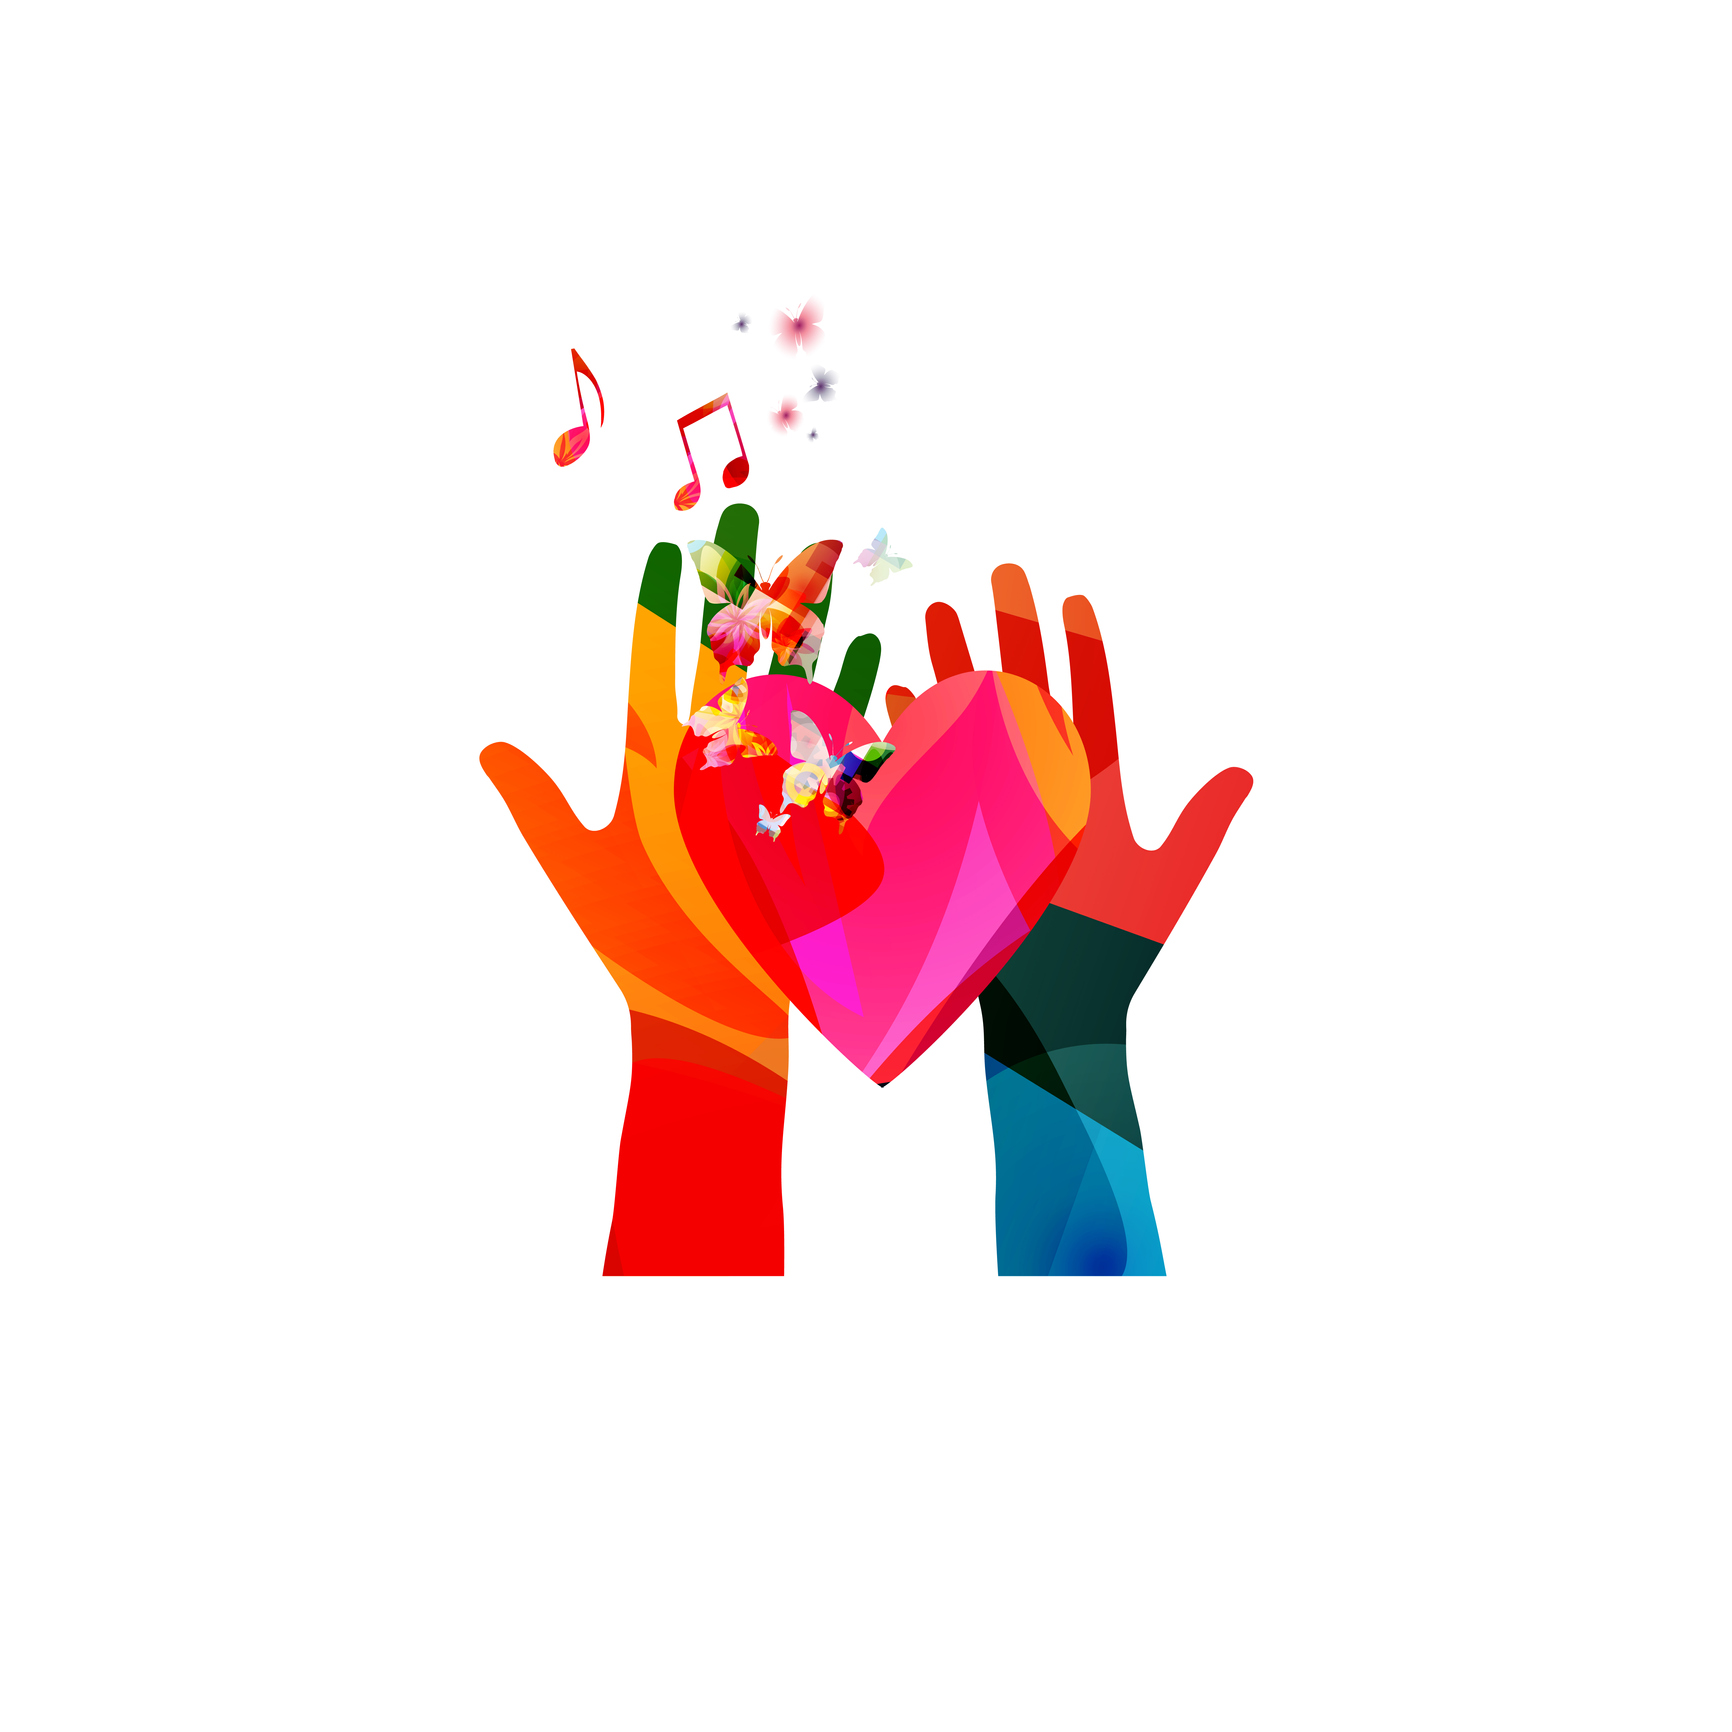 Colorful human hands raised and isolated vector illustration. Charity and help, volunteerism, social care and community support concepts